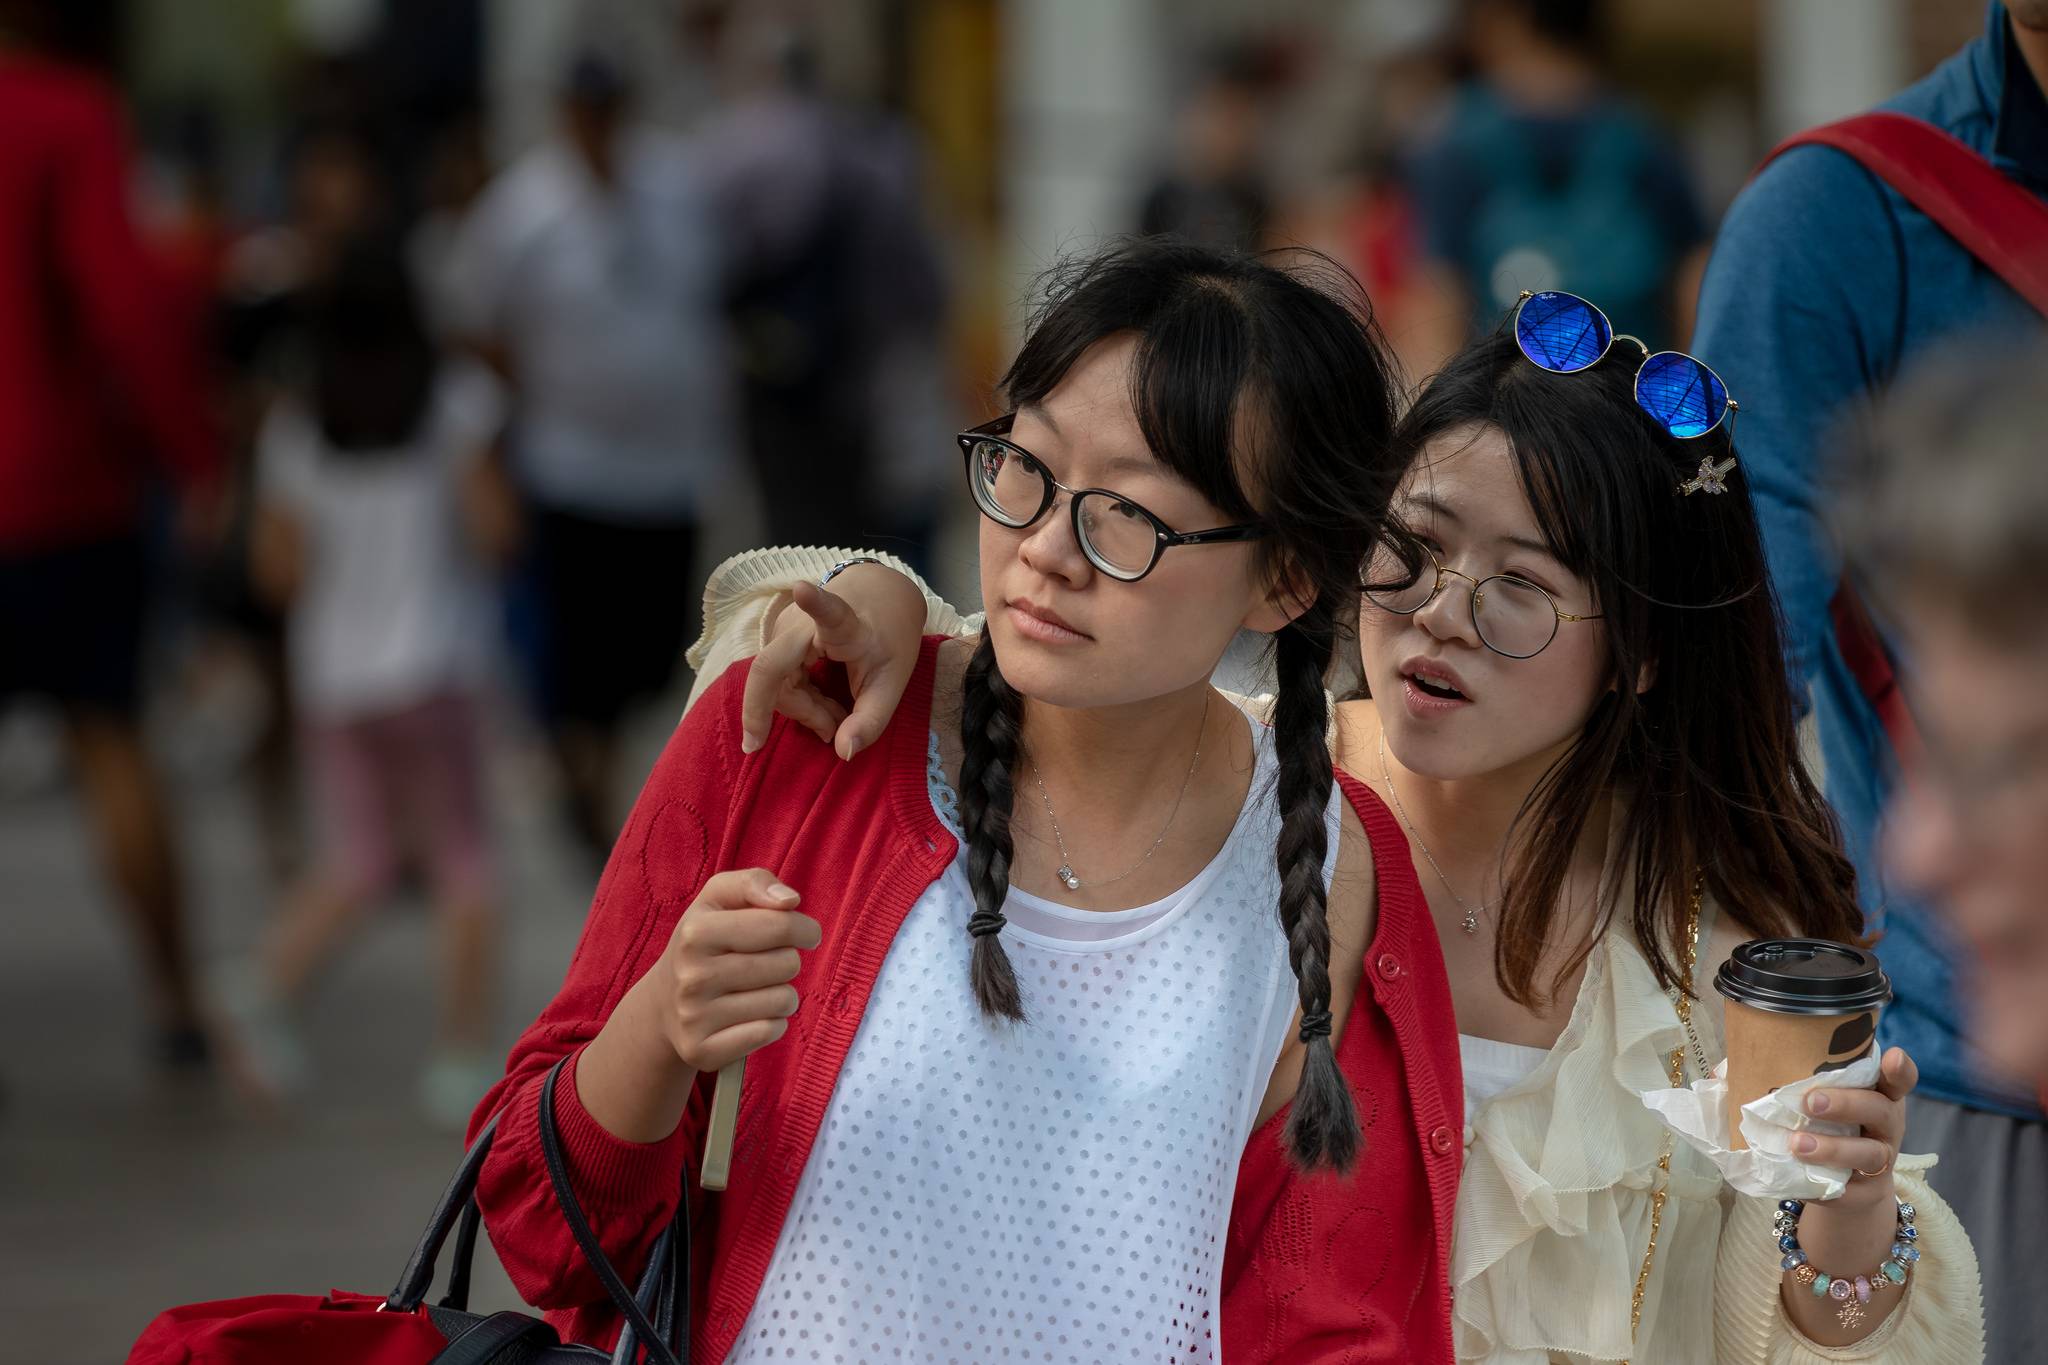 Why Australia appeals to Chinese travellers